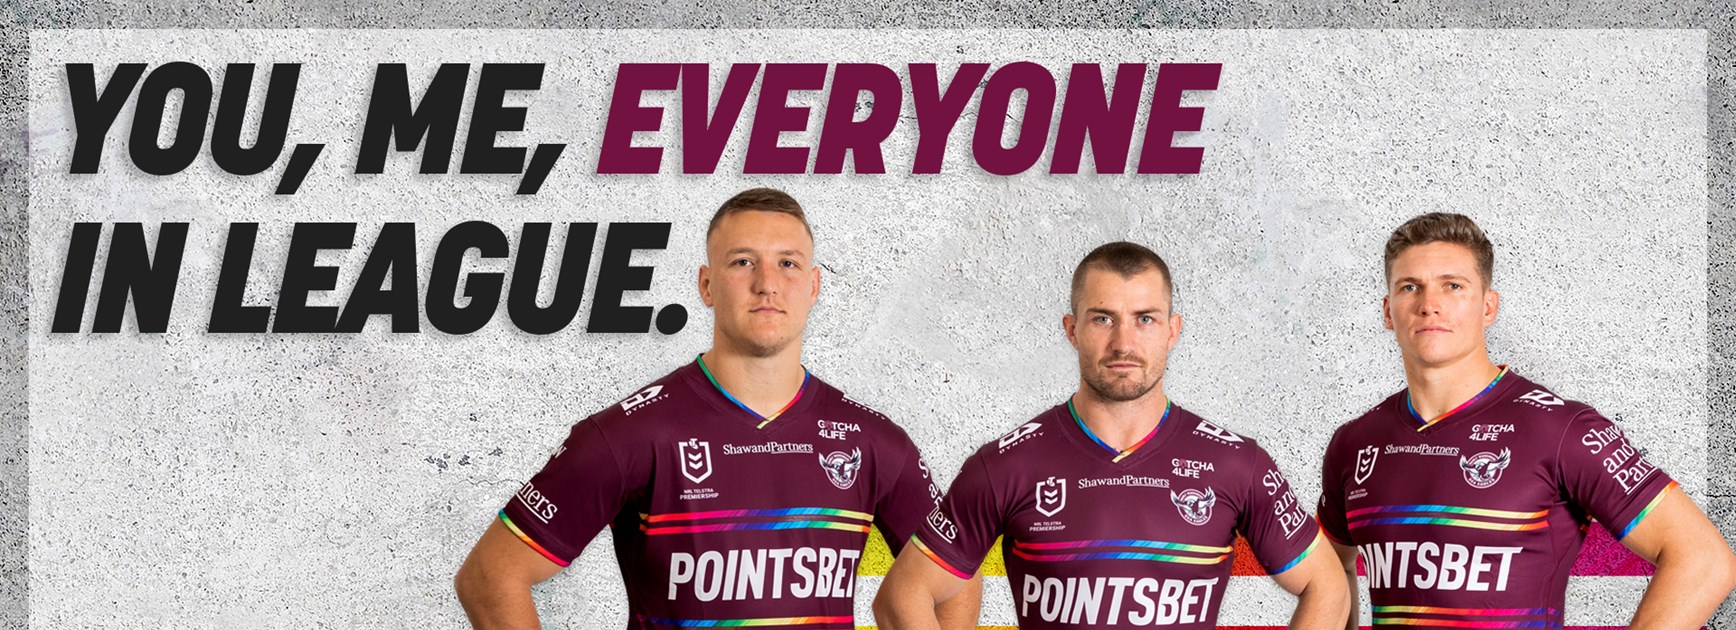 Sea Eagles and Dynasty Sport release Everyone in League jersey